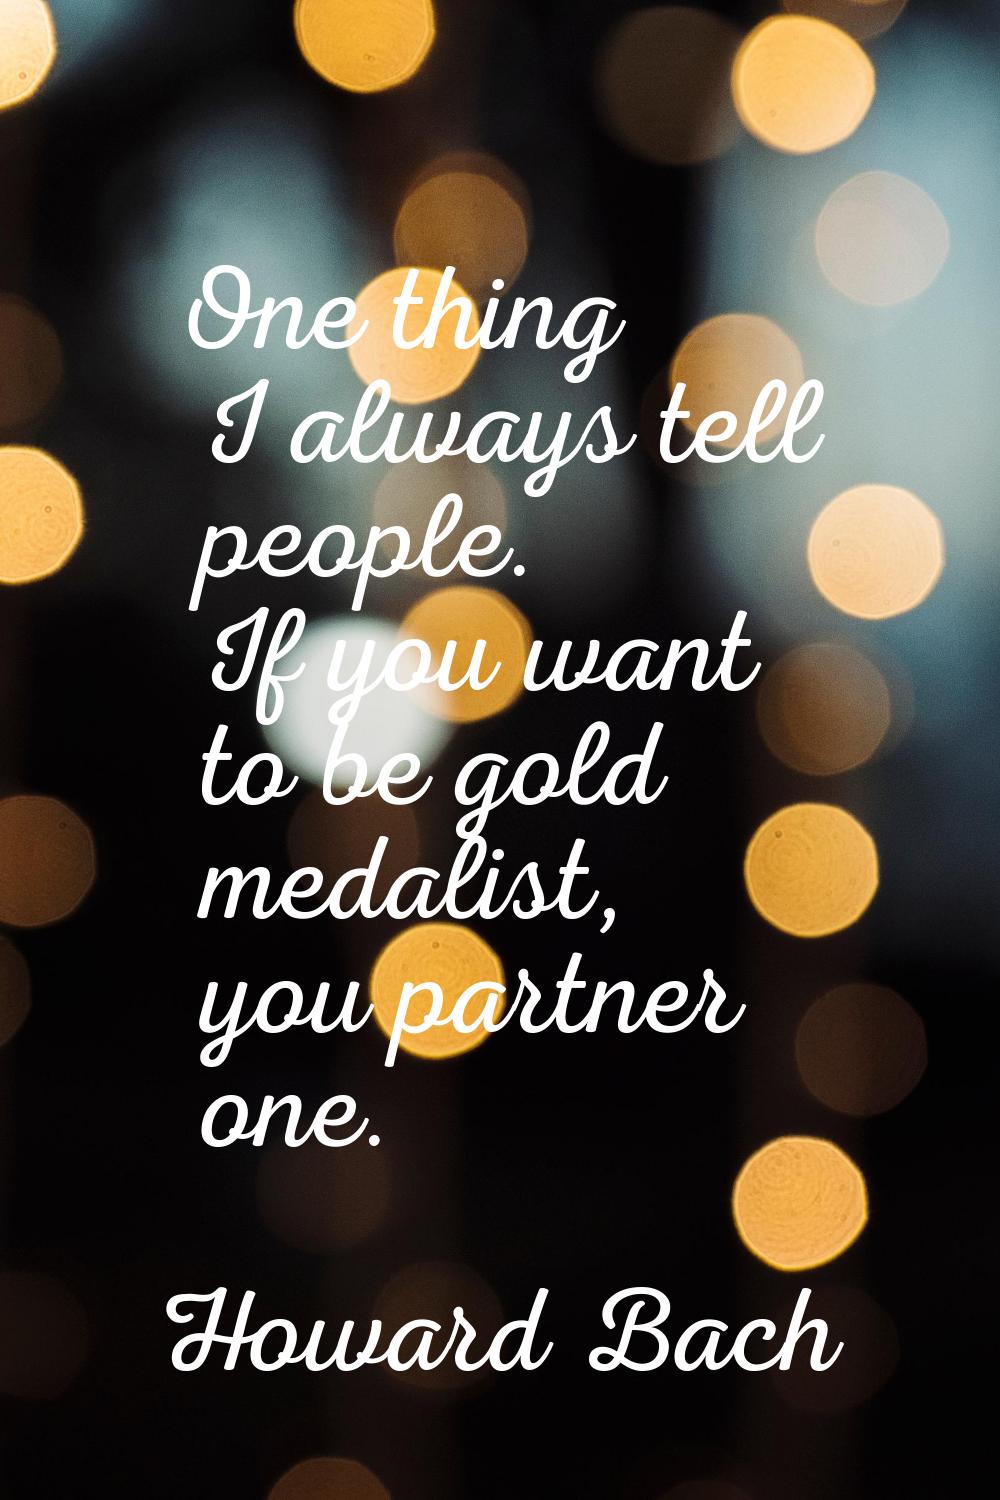 One thing I always tell people. If you want to be gold medalist, you partner one.